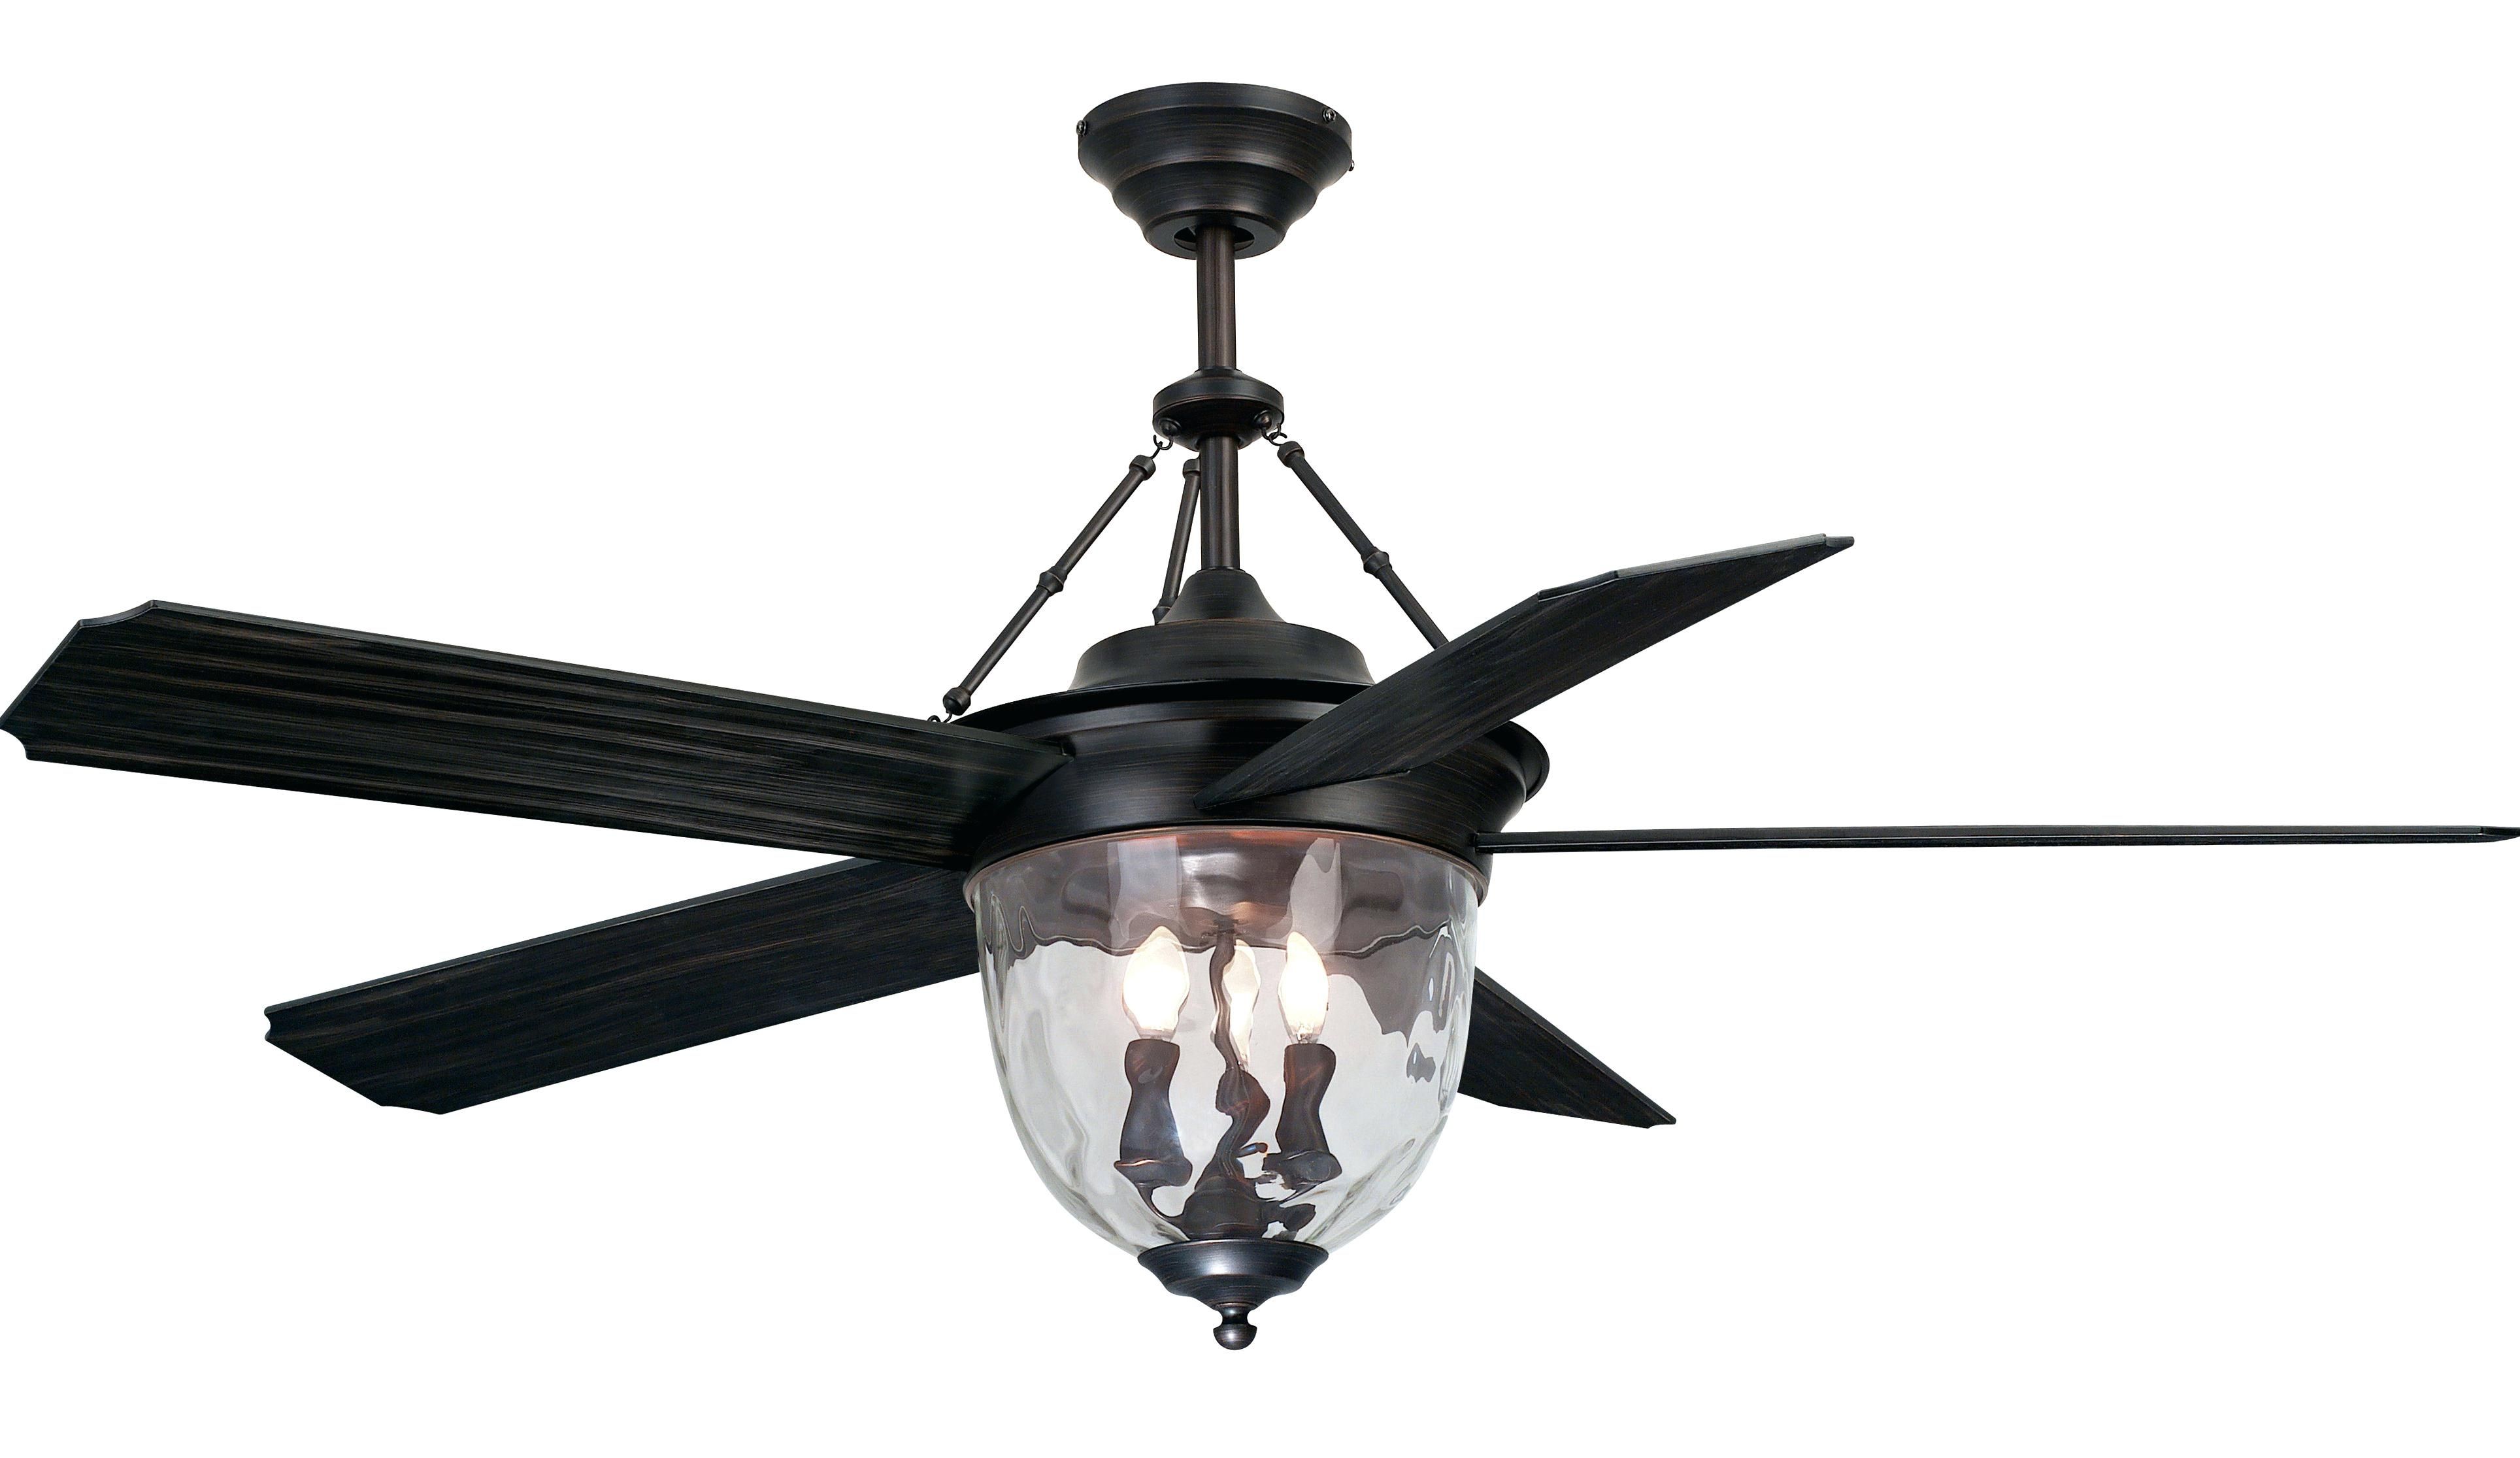 Outdoor Ceiling Fans With Lights Tropical Fan And Company Hunter Pertaining To Outdoor Ceiling Fans With Lights At Ebay (View 10 of 15)